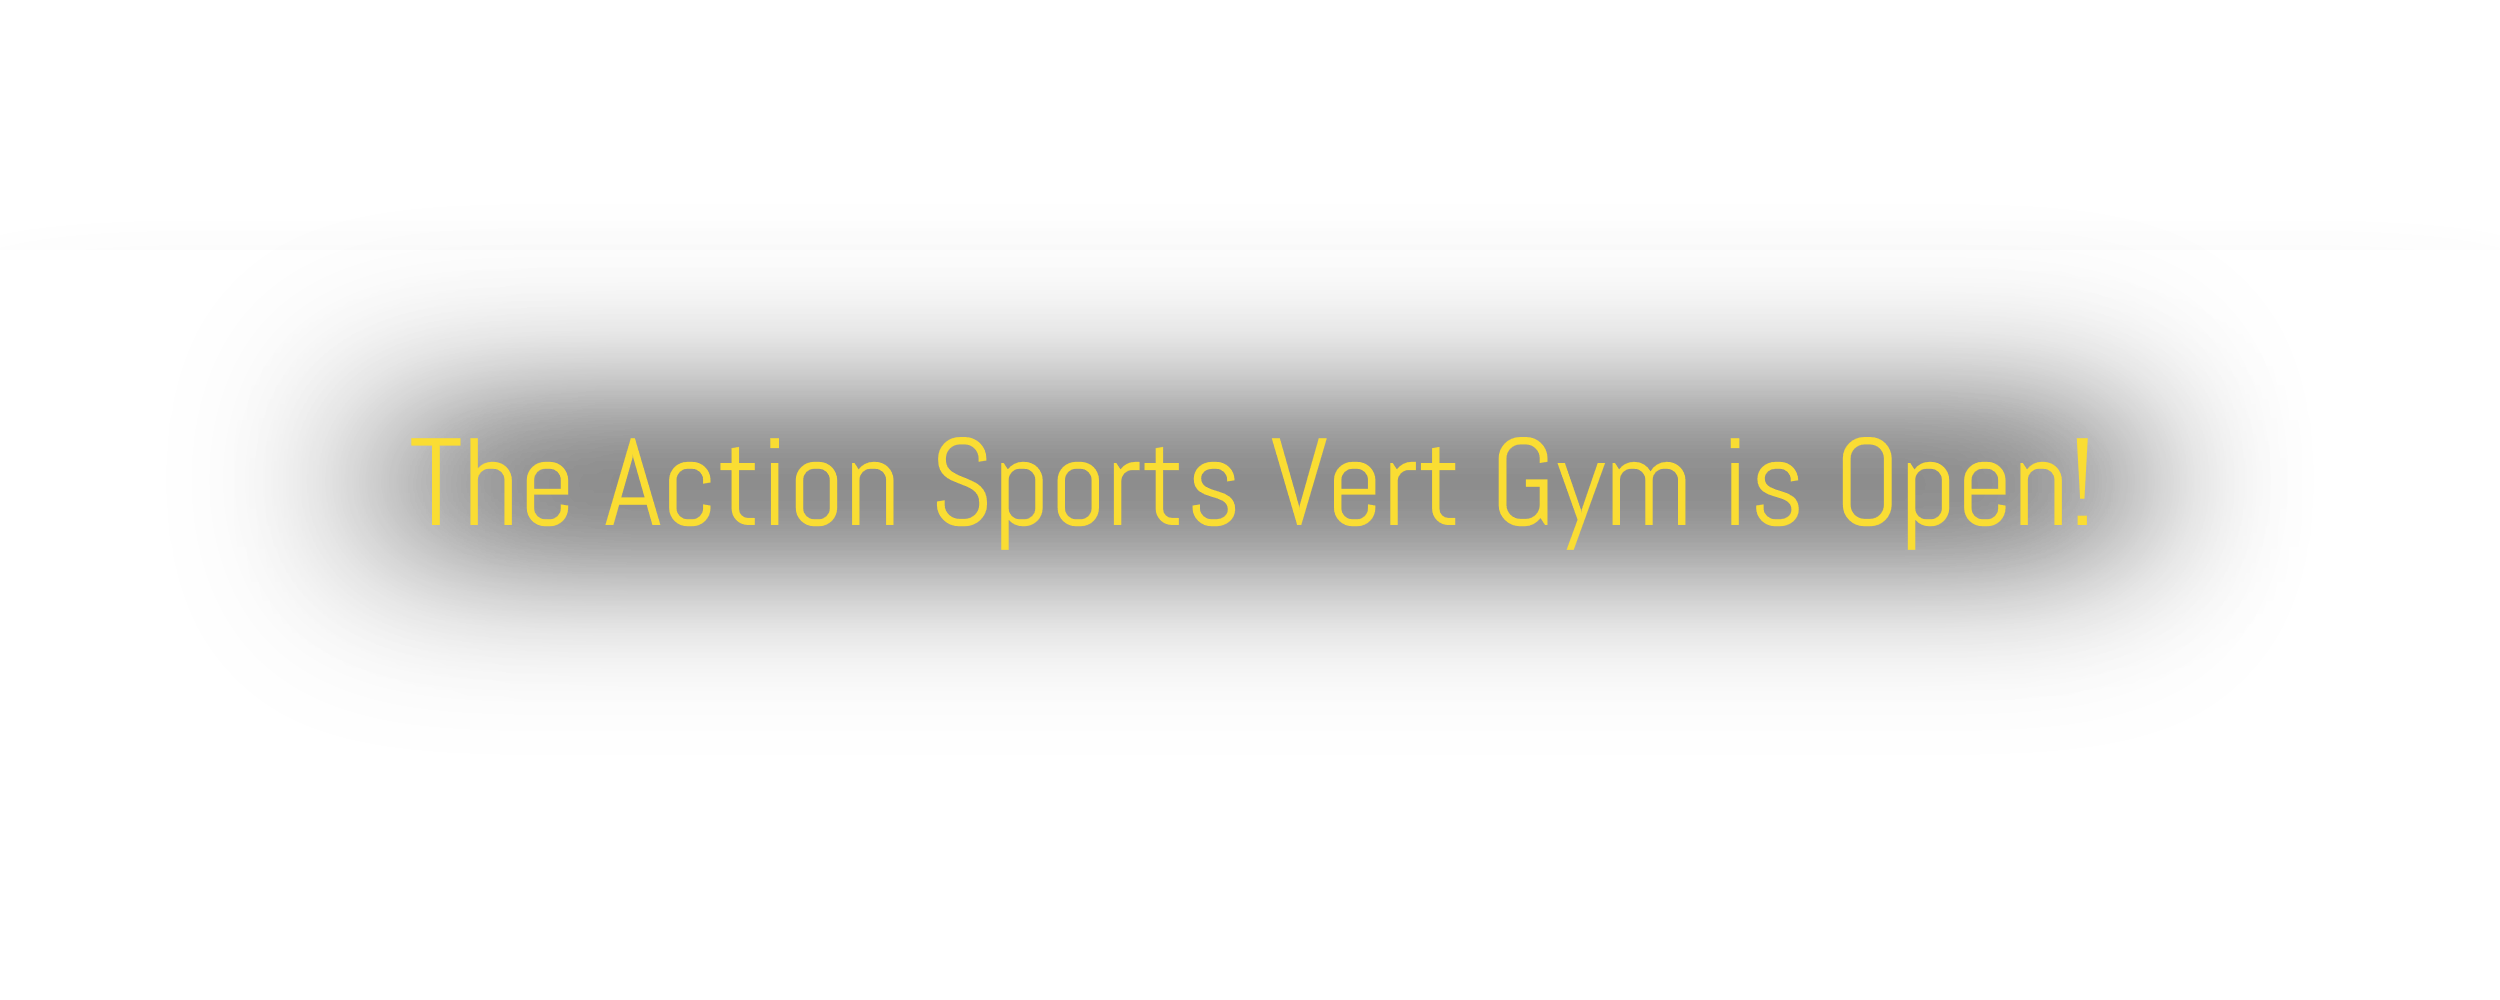 The Action Sports Vert Gym is Open!